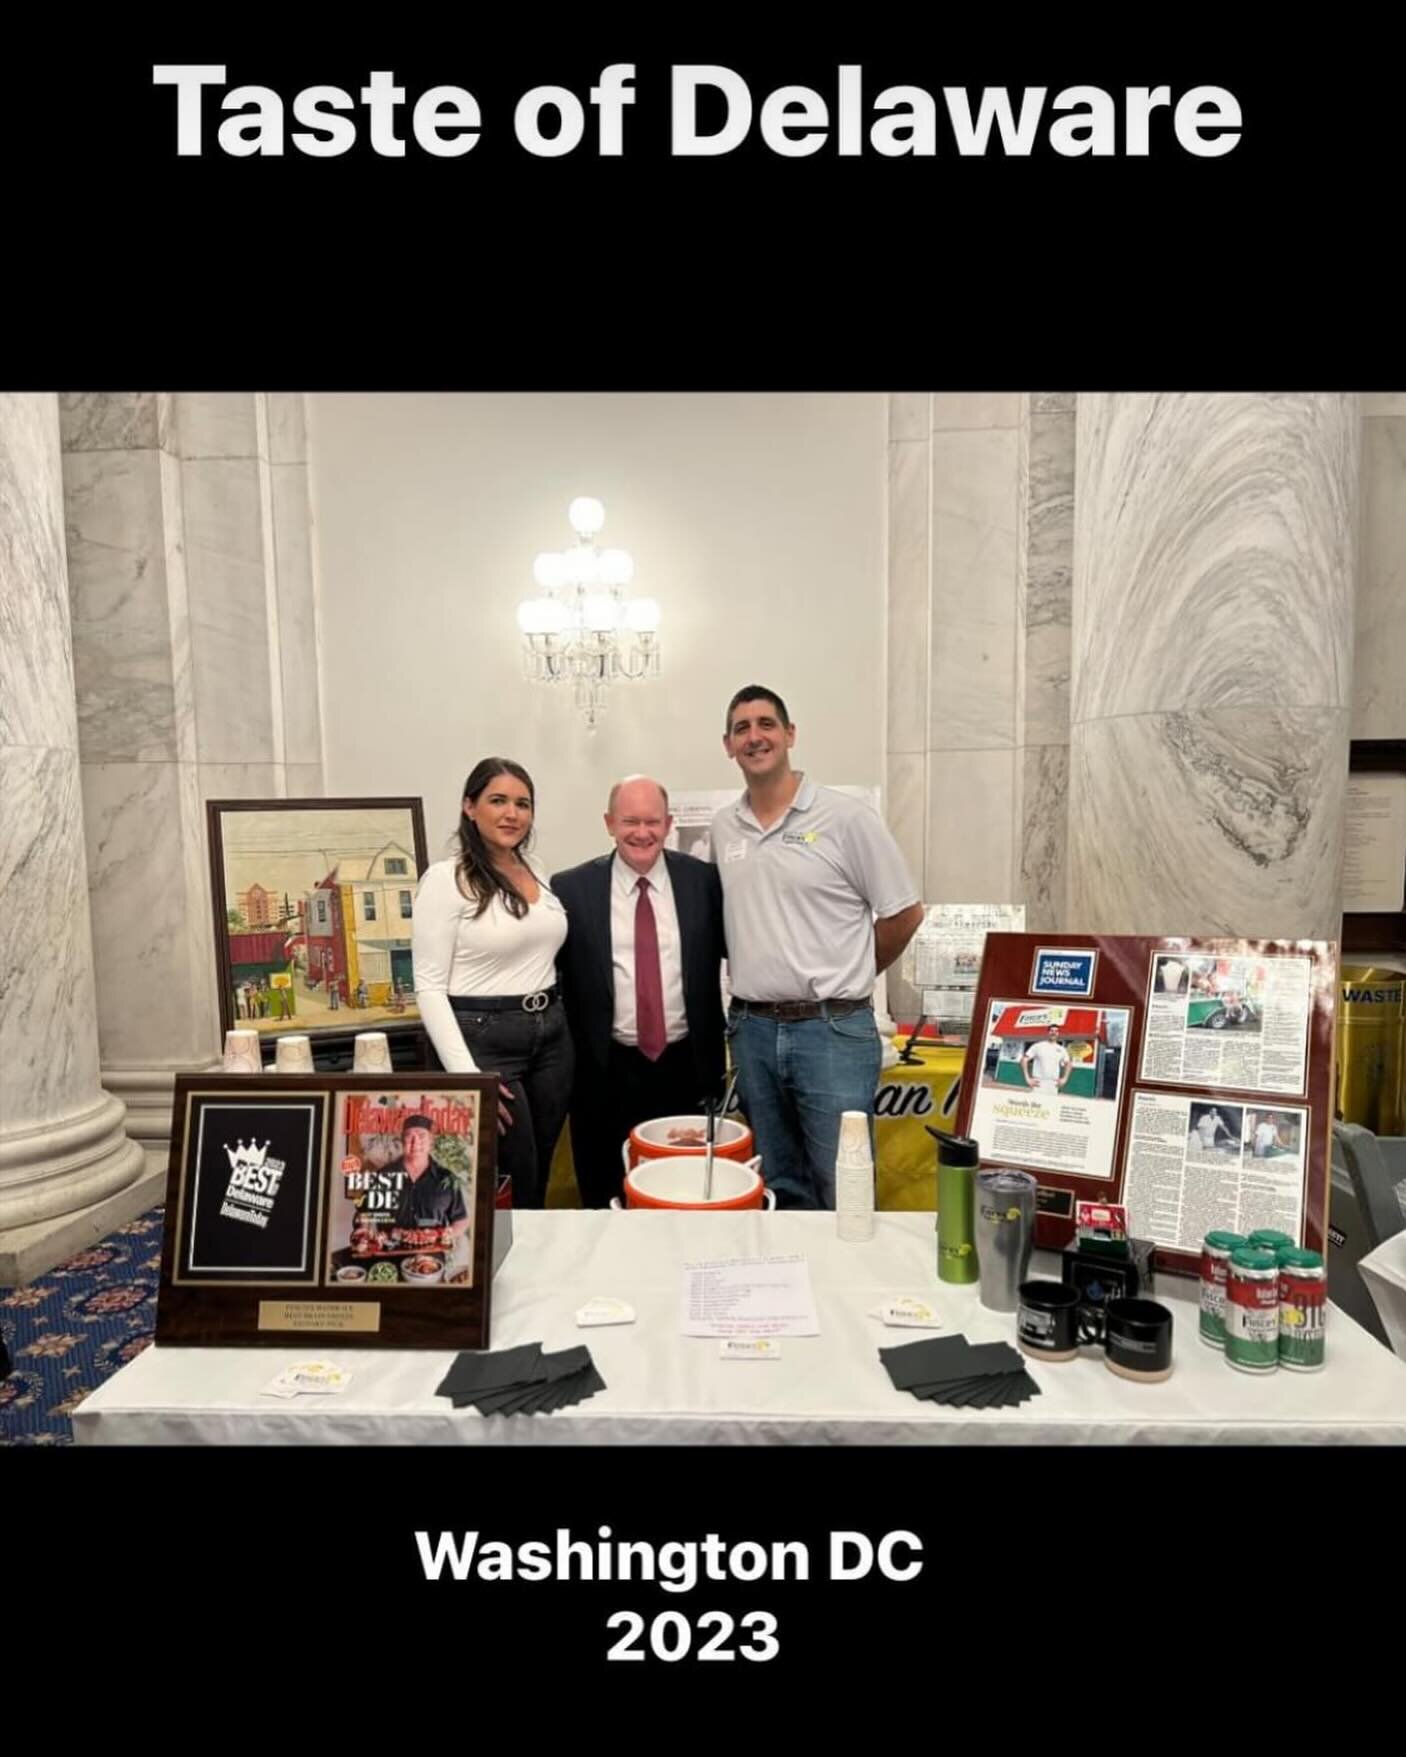 Thank you @destatechamber @senatorchriscoons and to all of those who played a role in the Taste of Delaware. 
We are very grateful to be a part of such a wonderful event and to have @fuscositalianwaterice there to represent the First State. 

#shakea